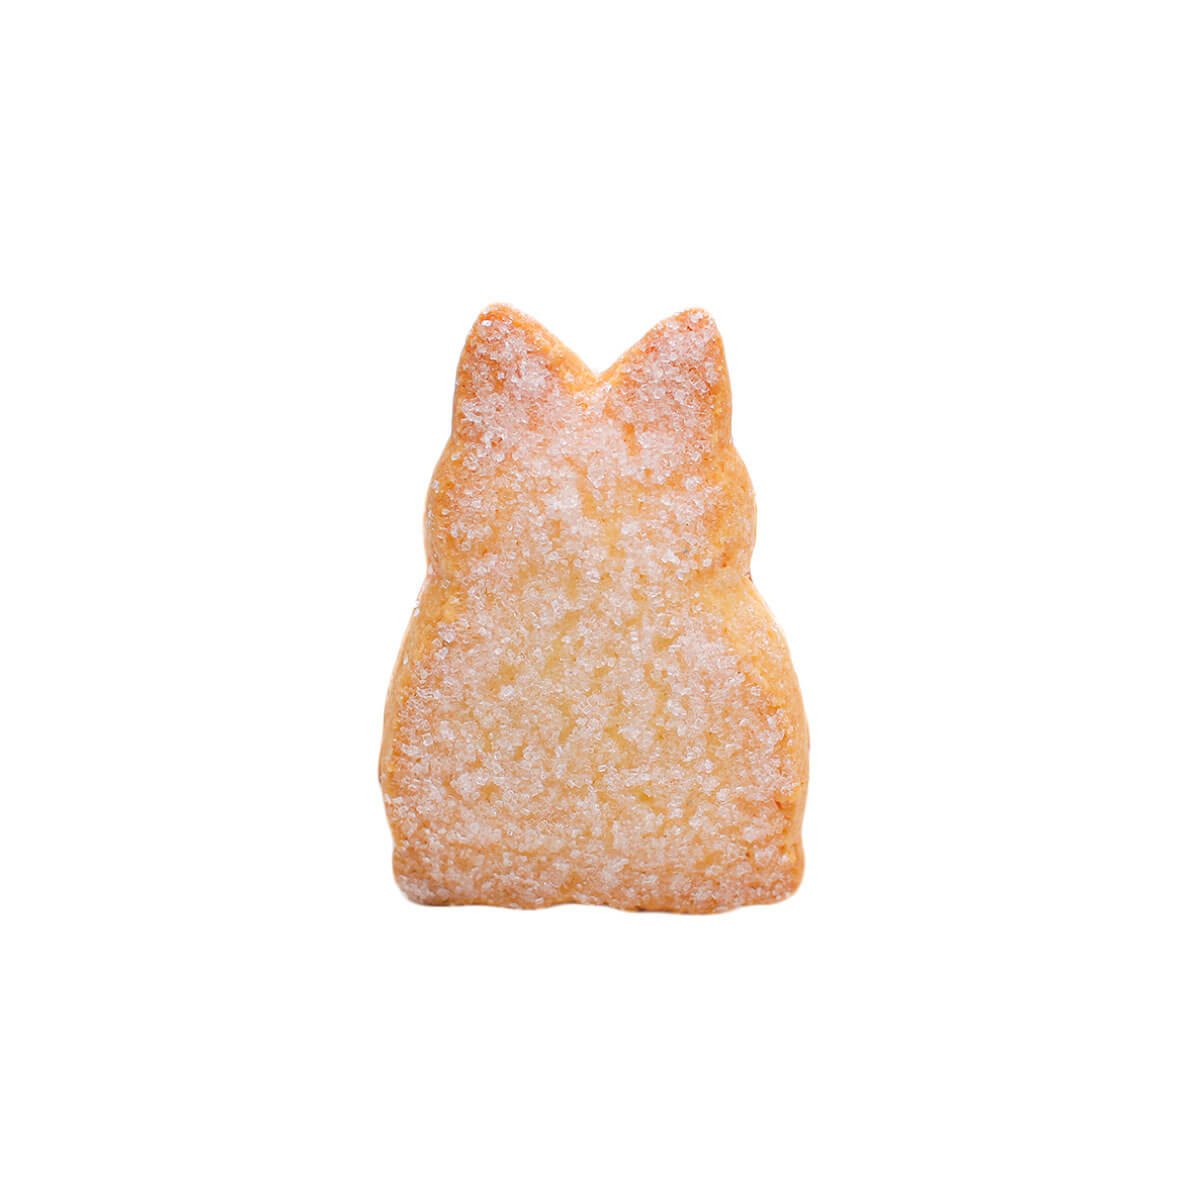 Crystal Sugar Bunny Butter Cookie